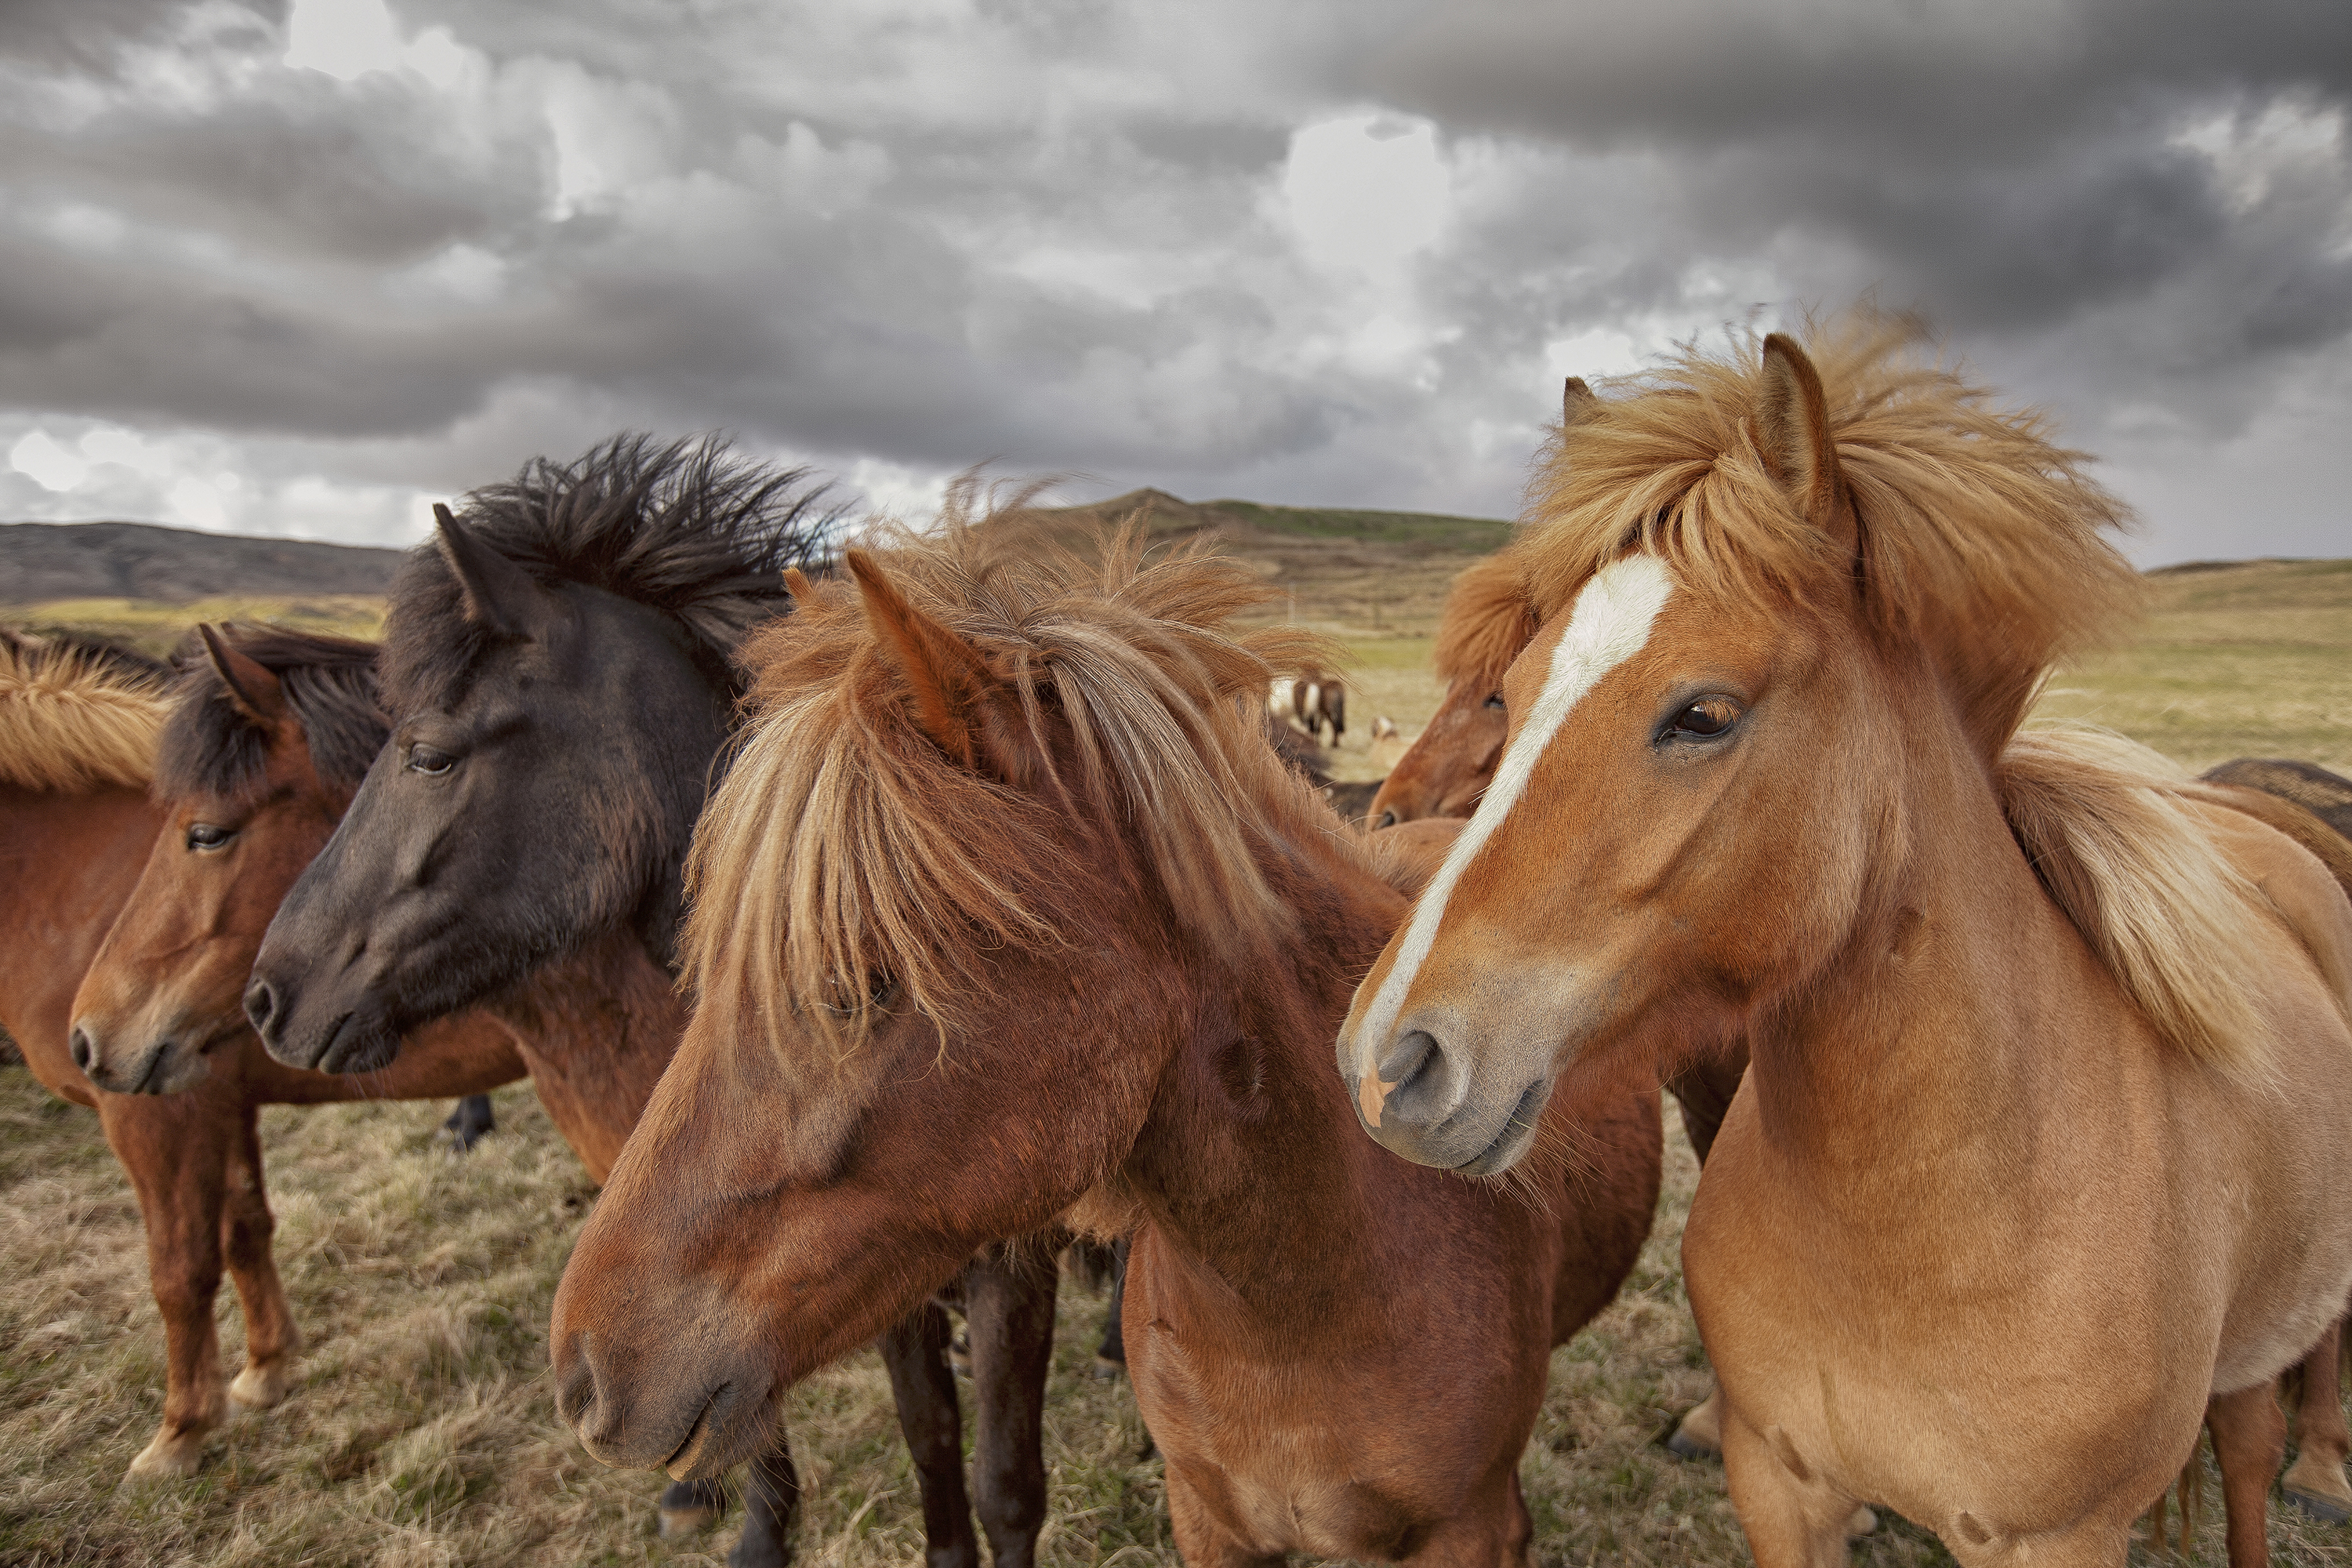 If an Icelandic horse ever leaves the country, they are forbidden to return in order to keep the breed wholesome and isolated.